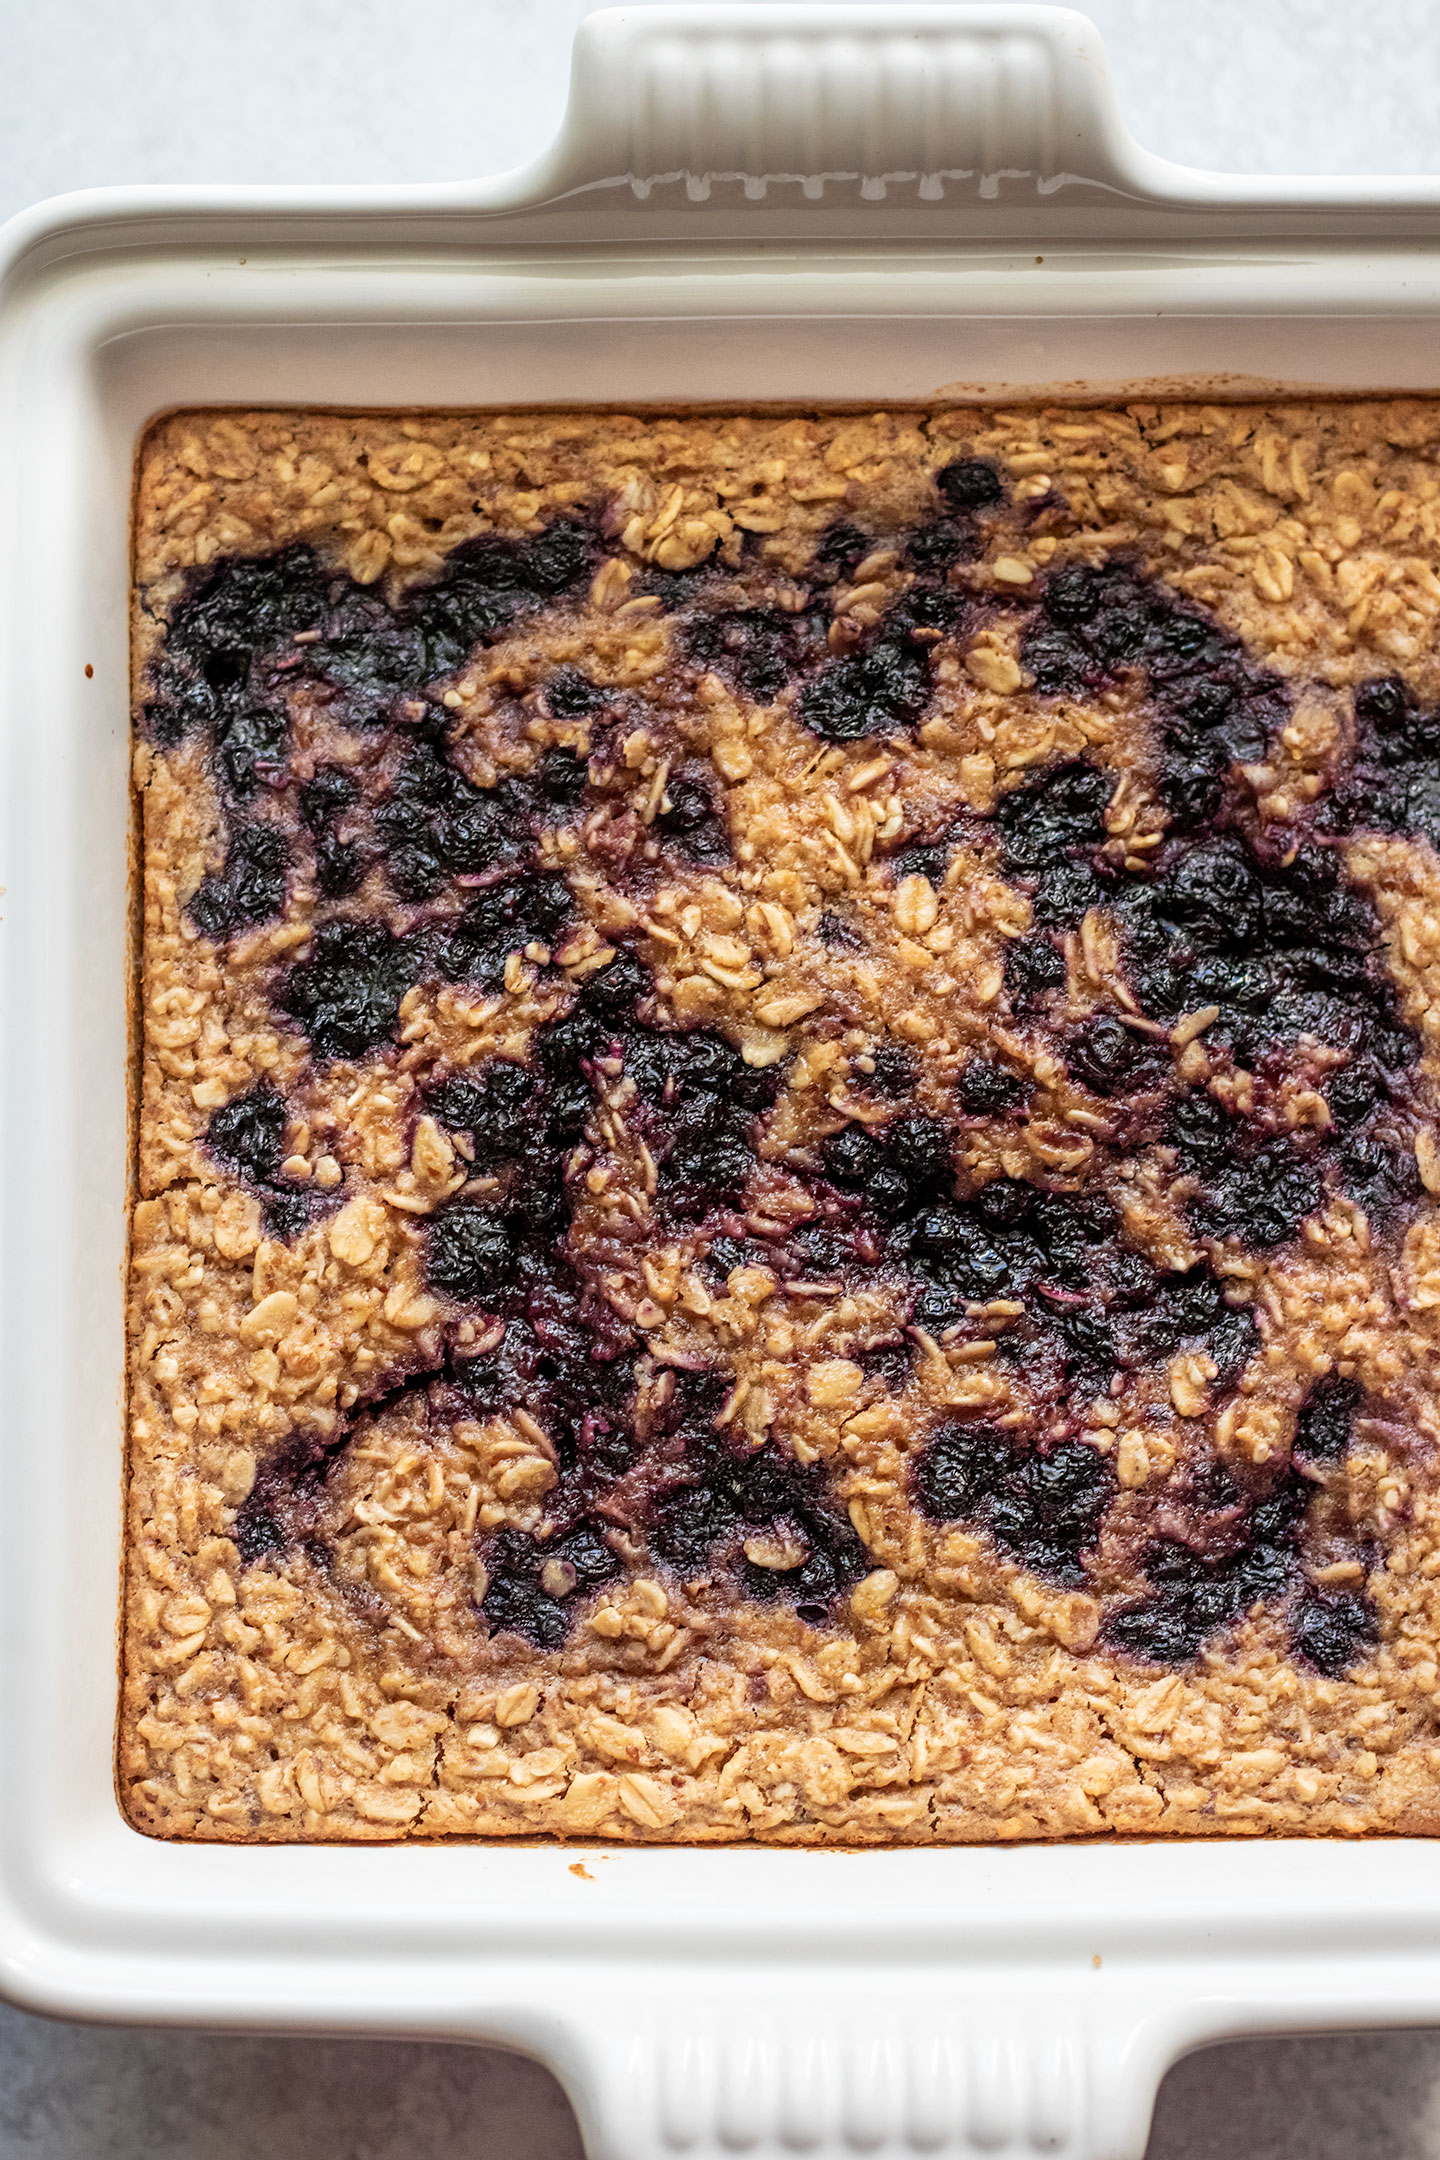 The baked oatmeal out of the oven.